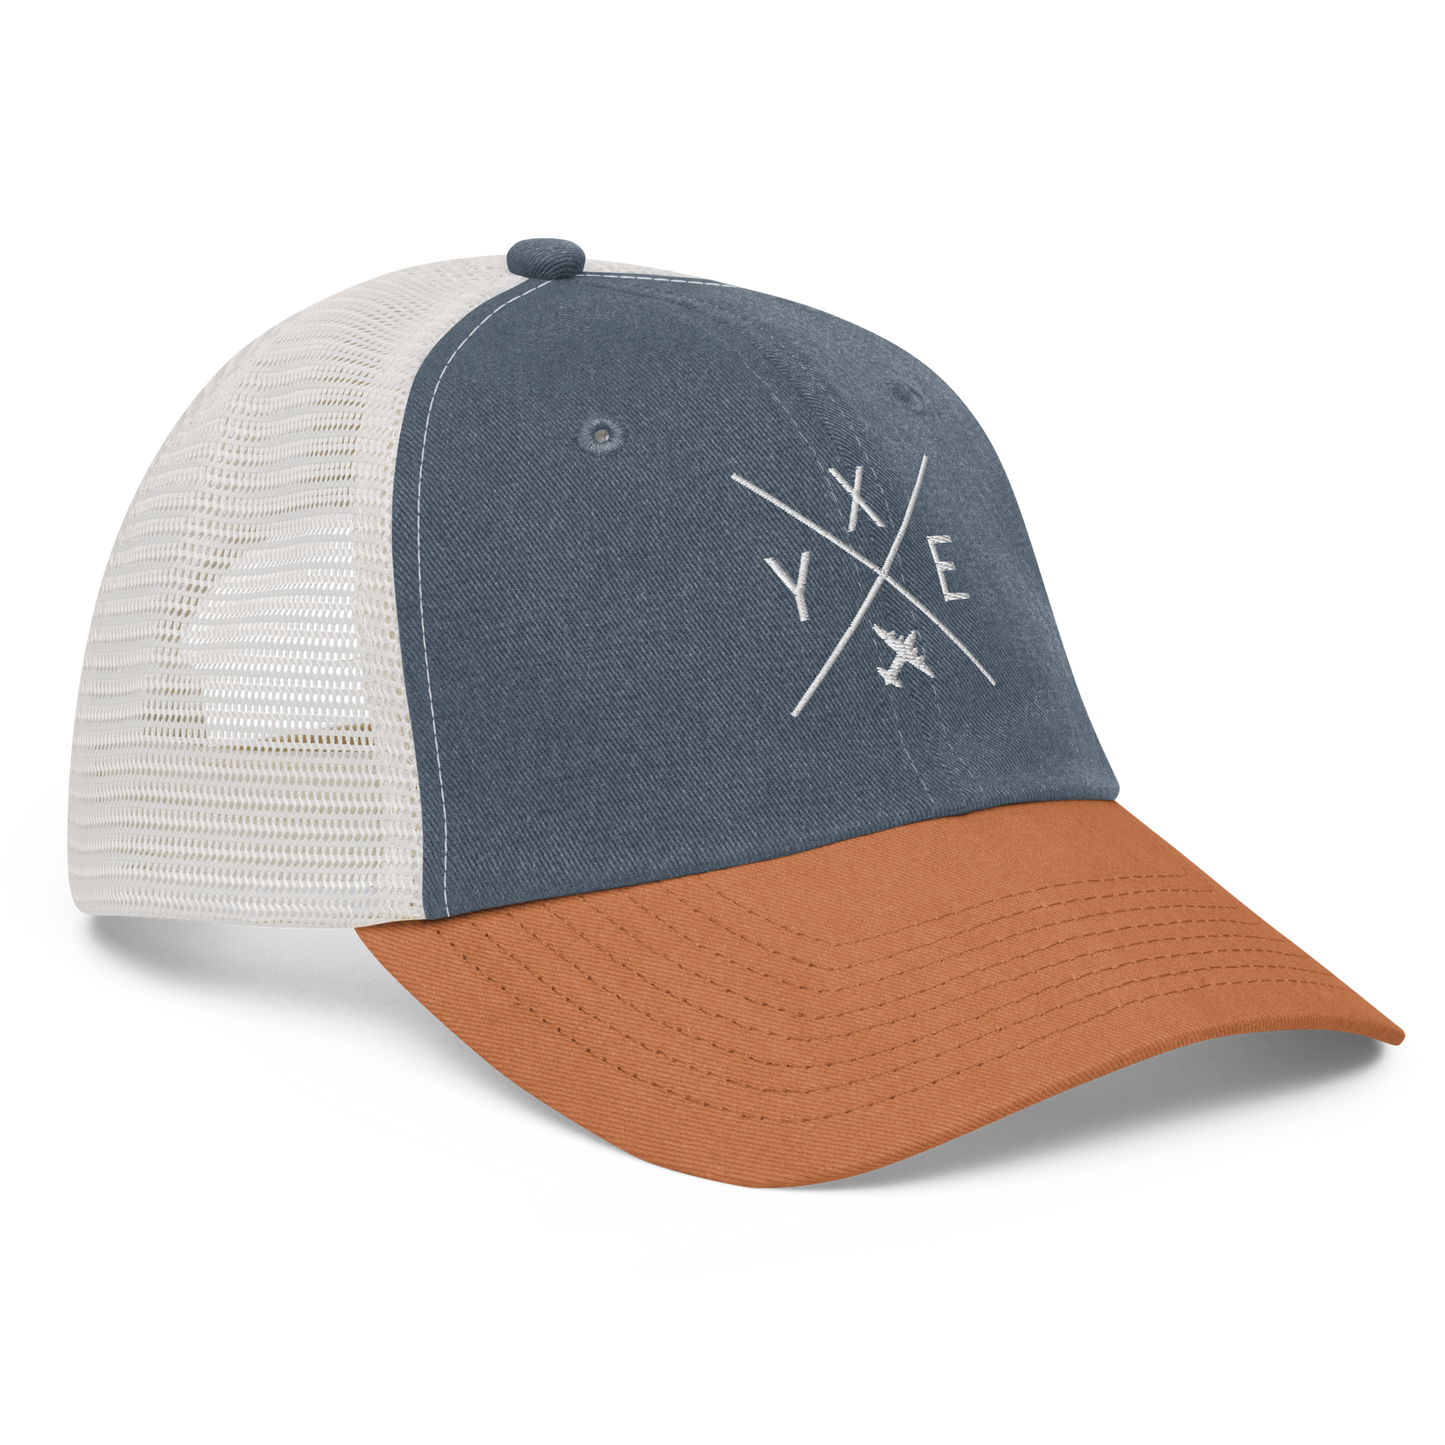 YHM Designs - YXE Saskatoon Pigment-Dyed Trucker Cap - Crossed-X Design with Airport Code and Vintage Propliner - White Embroidery - Image 16